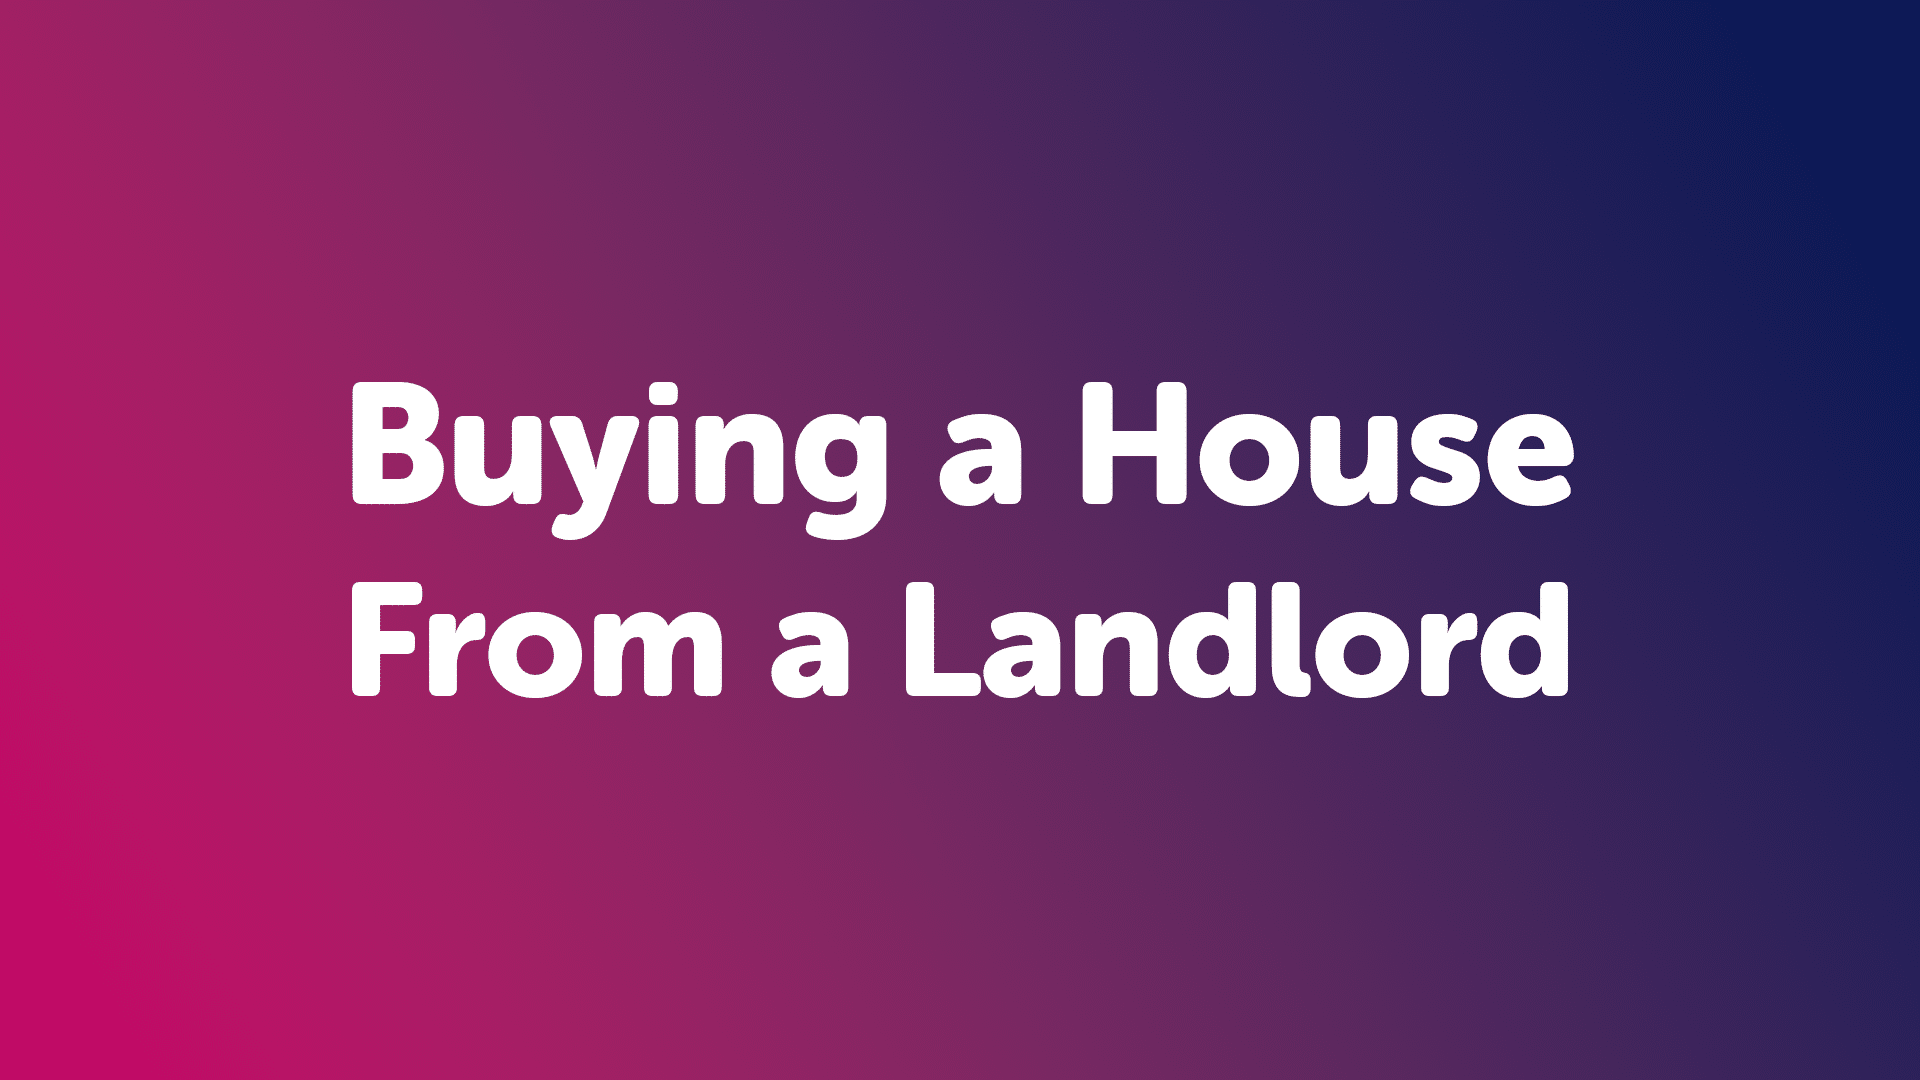 Buying a House From a Landlord in Doncaster: A Unique Opportunity